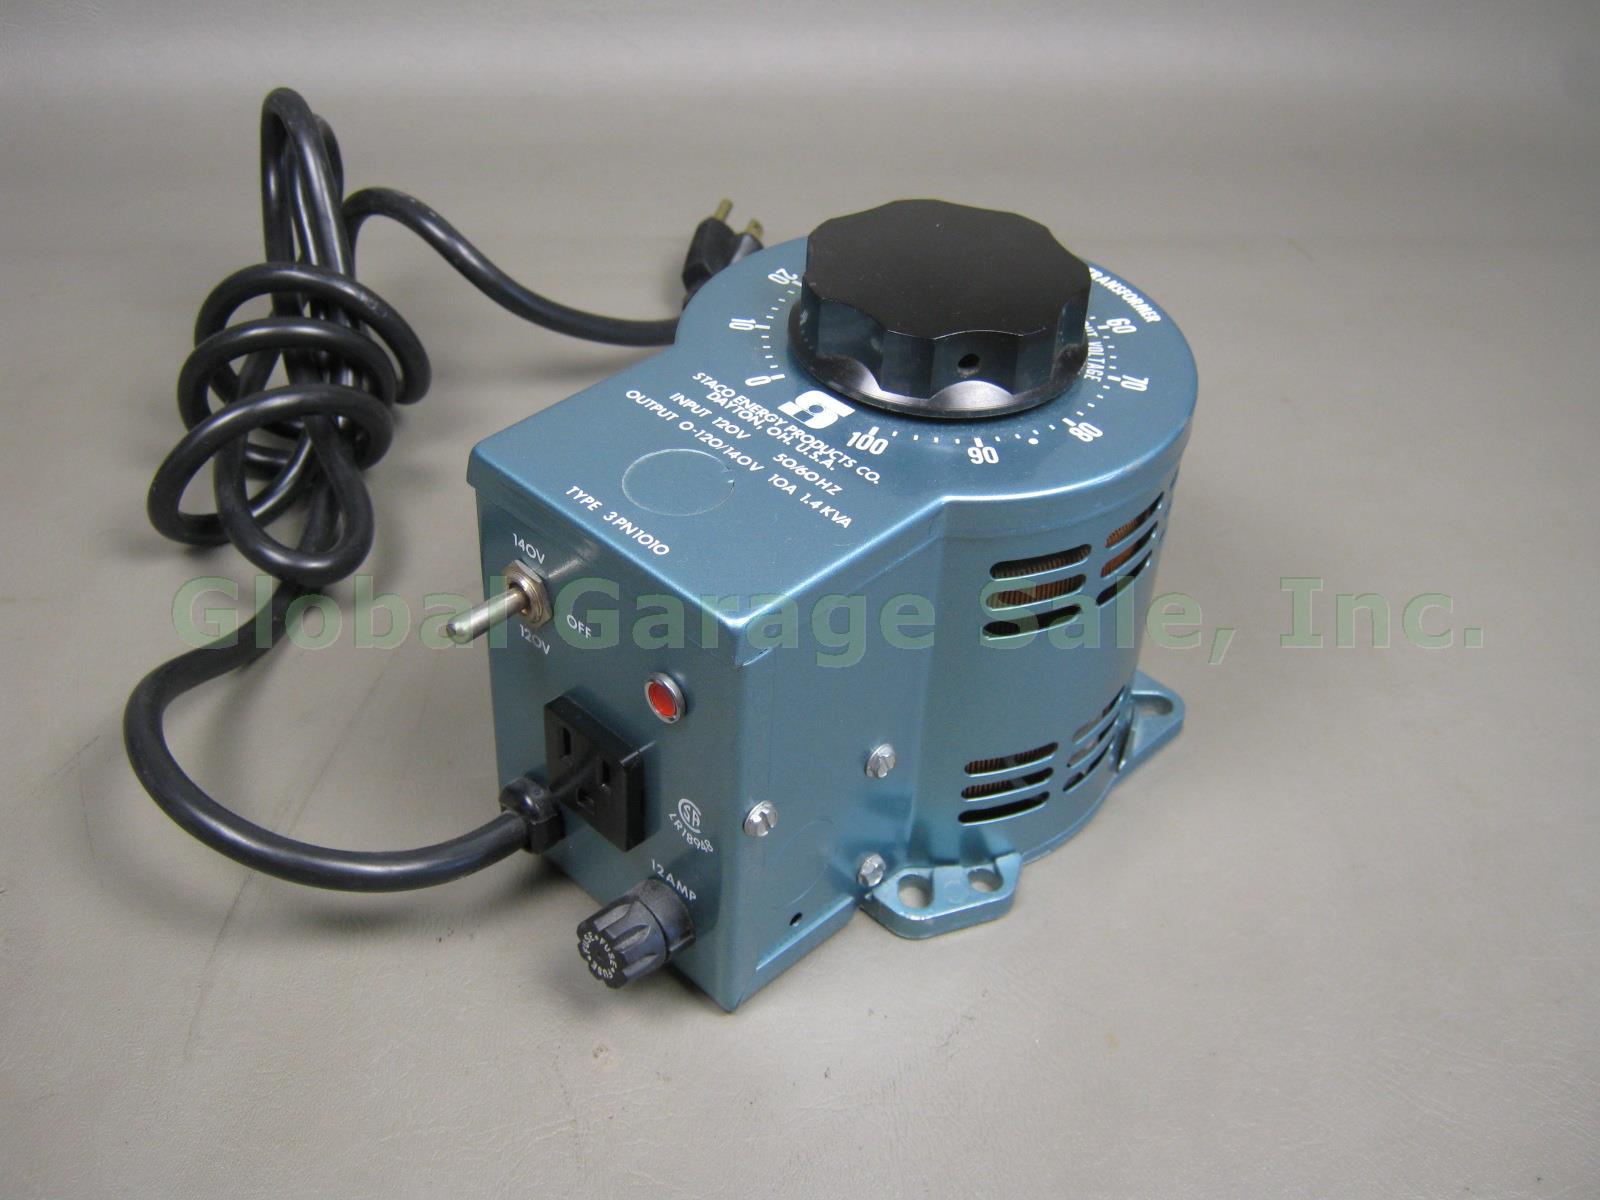 Staco Energy Products Co Variable Autotransformer Model Type 3PN1010 120V 50/60 1